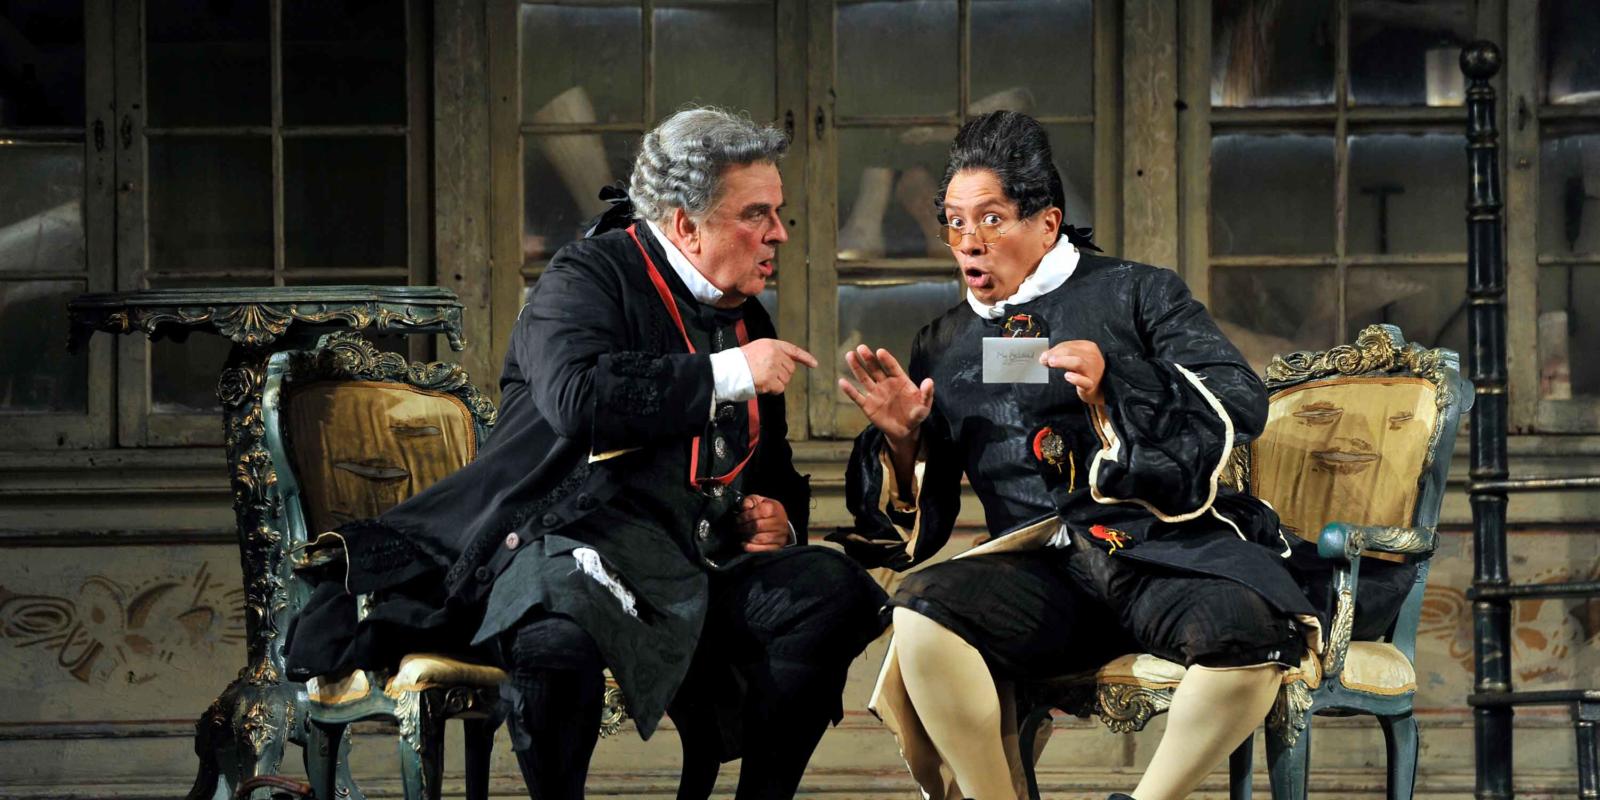 ENO The Barber of Seville: Alan Opie and Eleazar Rodriguez in period costume on stage(c) Robbie Jack